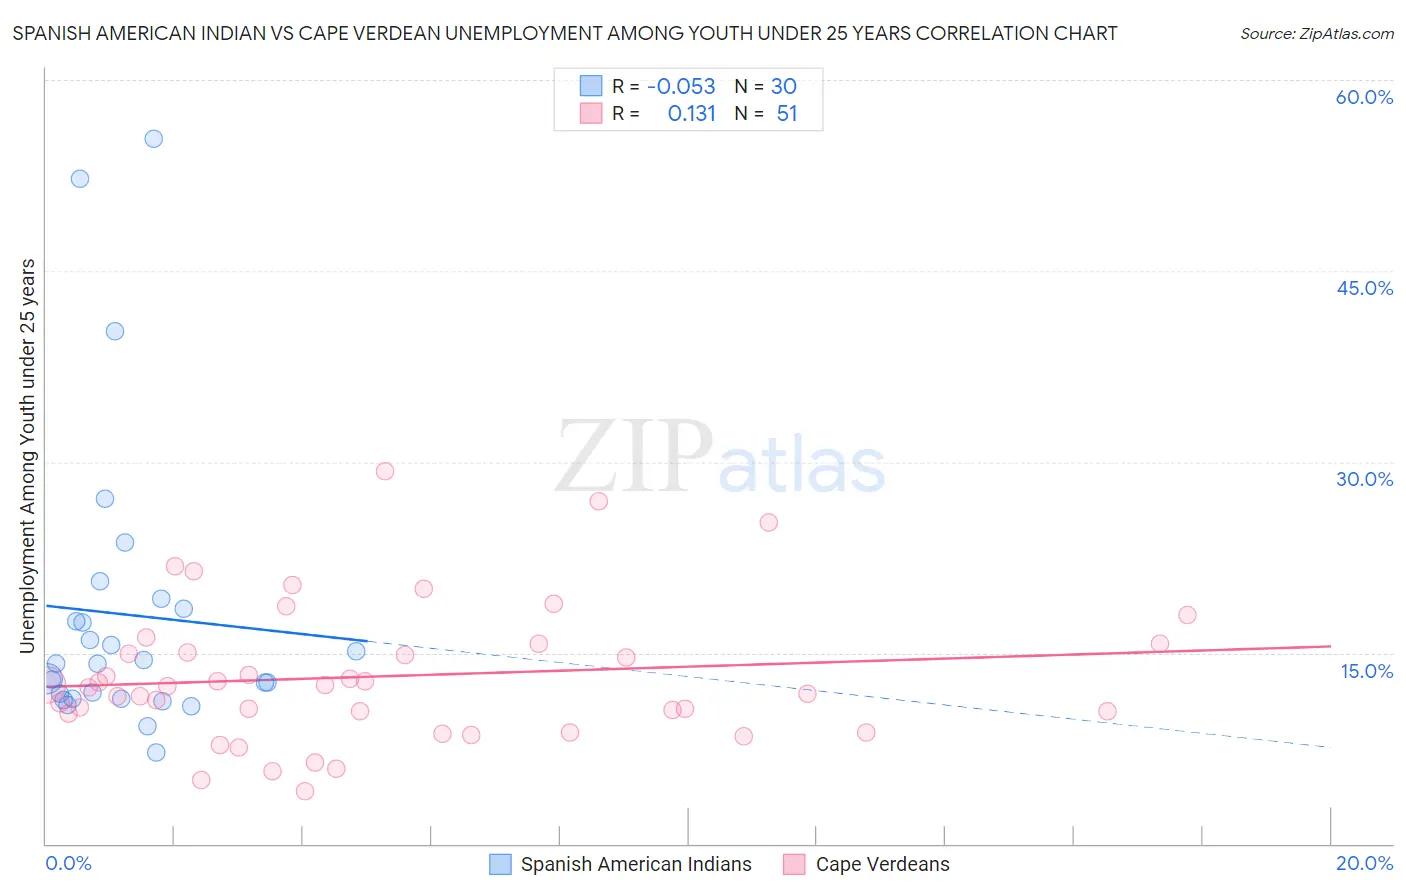 Spanish American Indian vs Cape Verdean Unemployment Among Youth under 25 years